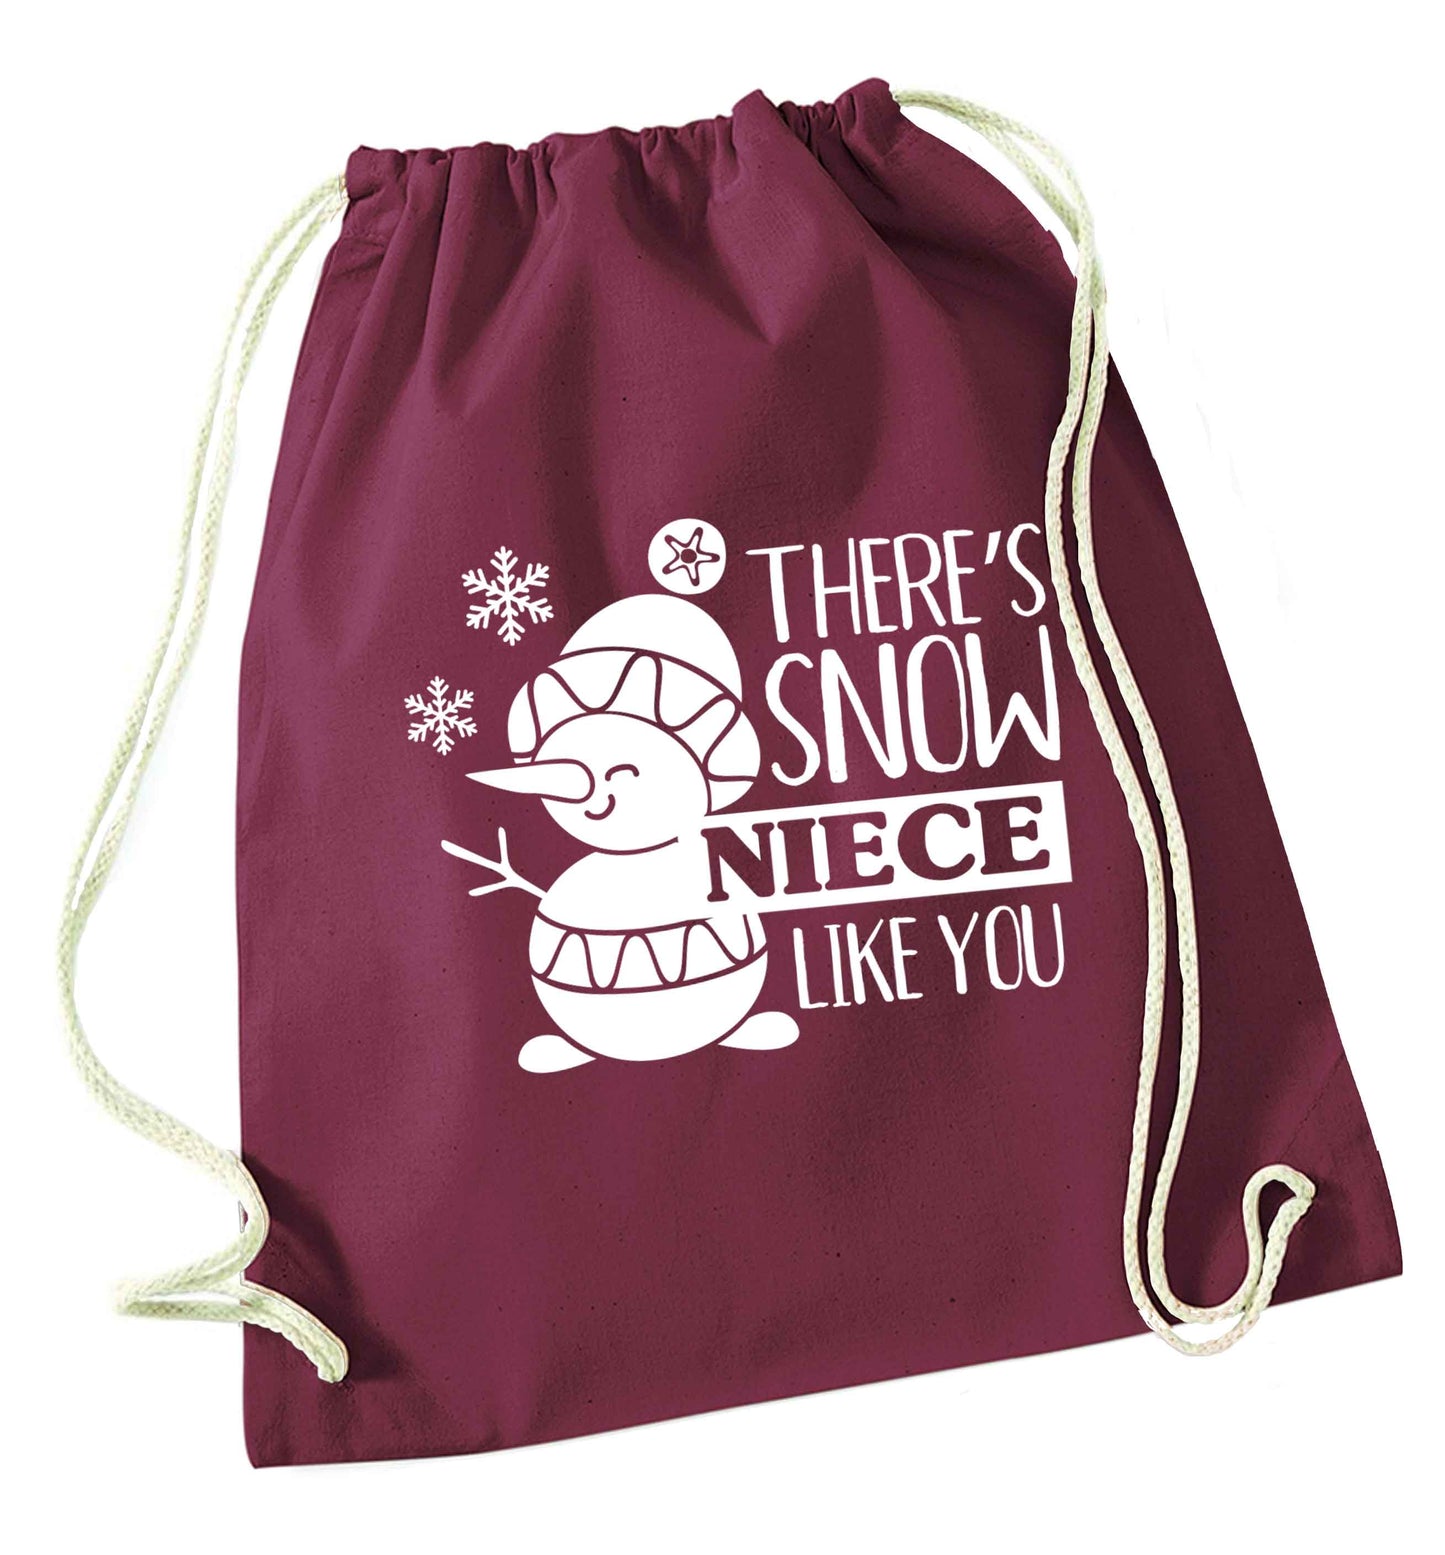 There's snow niece like you maroon drawstring bag